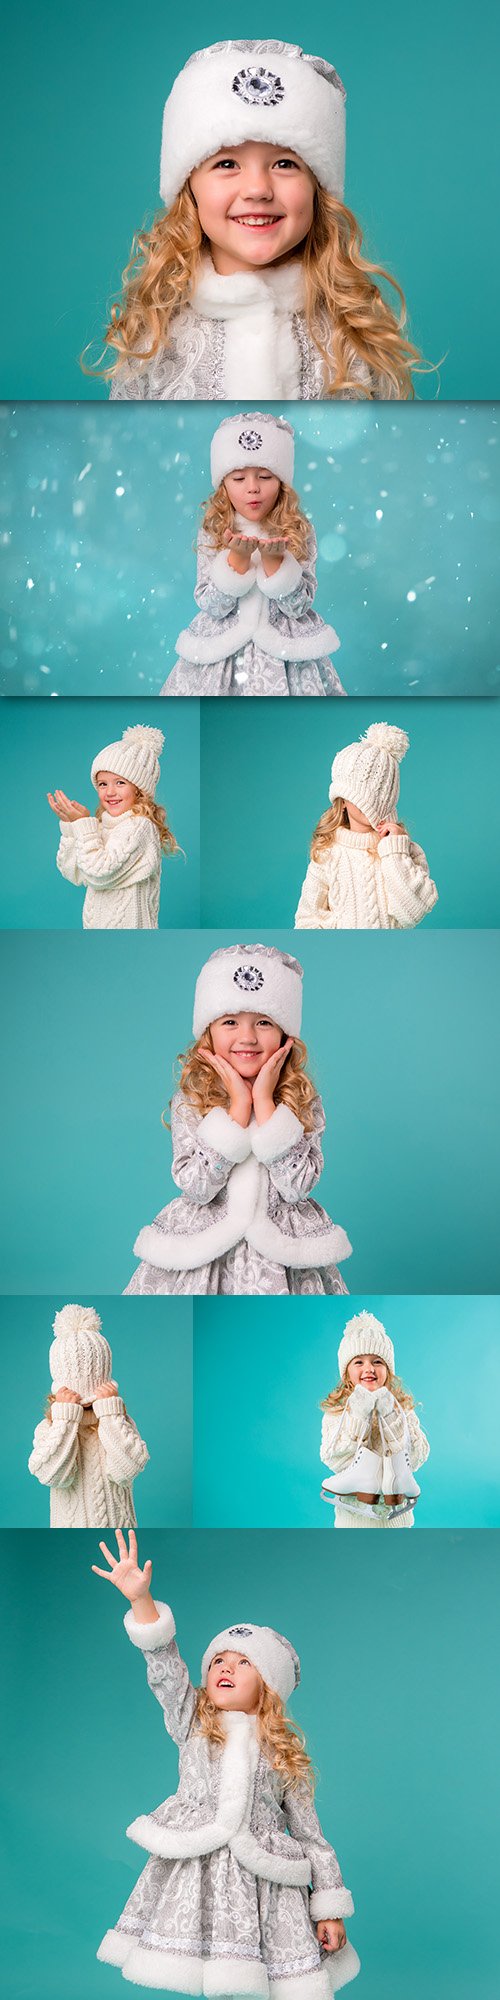 Little girl in snow maiden suit and knitted hat